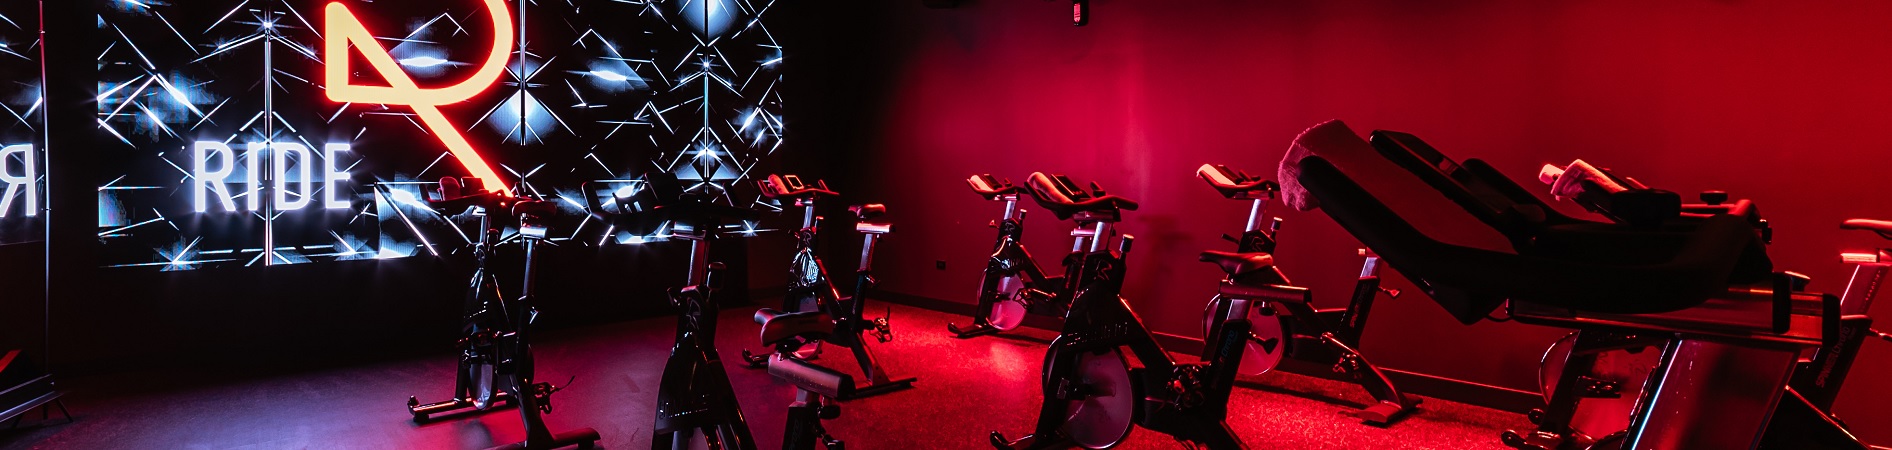 cycle classes at midtown athletic club